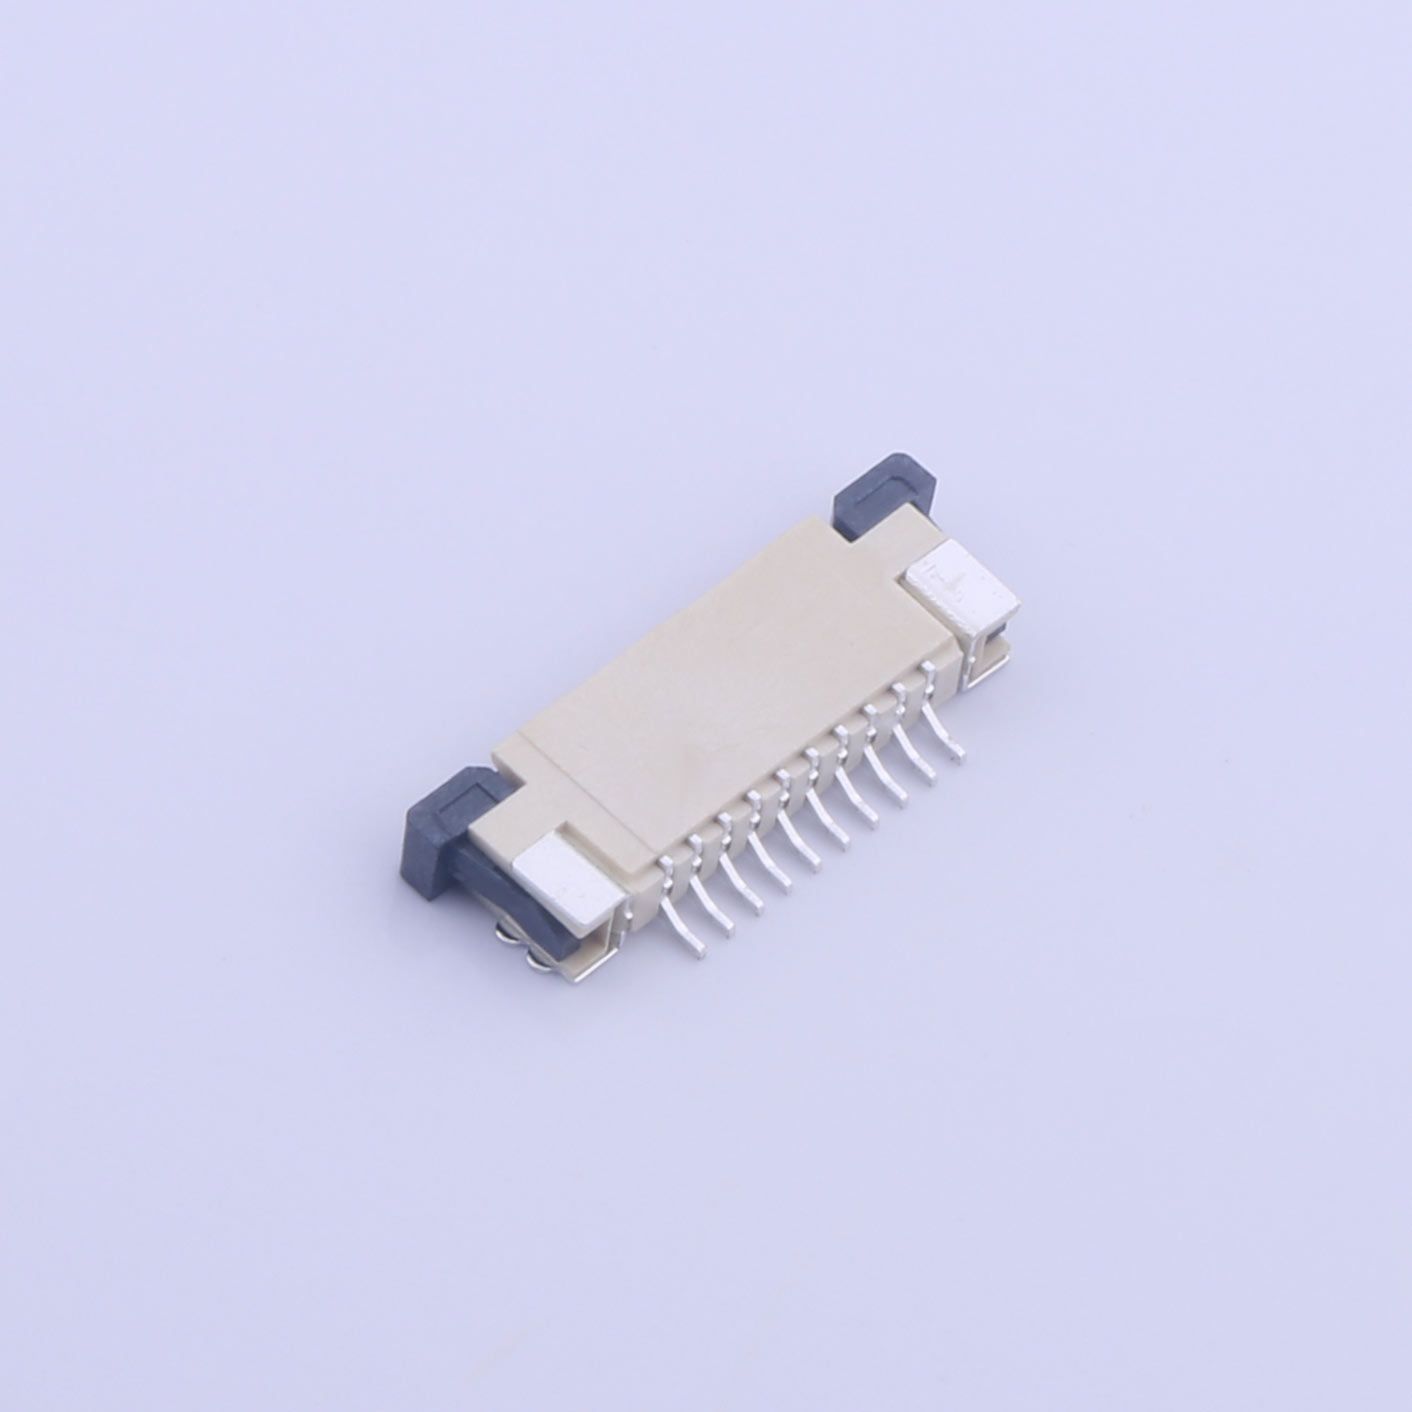 Kinghelm FFC/FPC Connector 10P foot distance Pitch 1mm - KH-CL1.0-H2.5-10ps